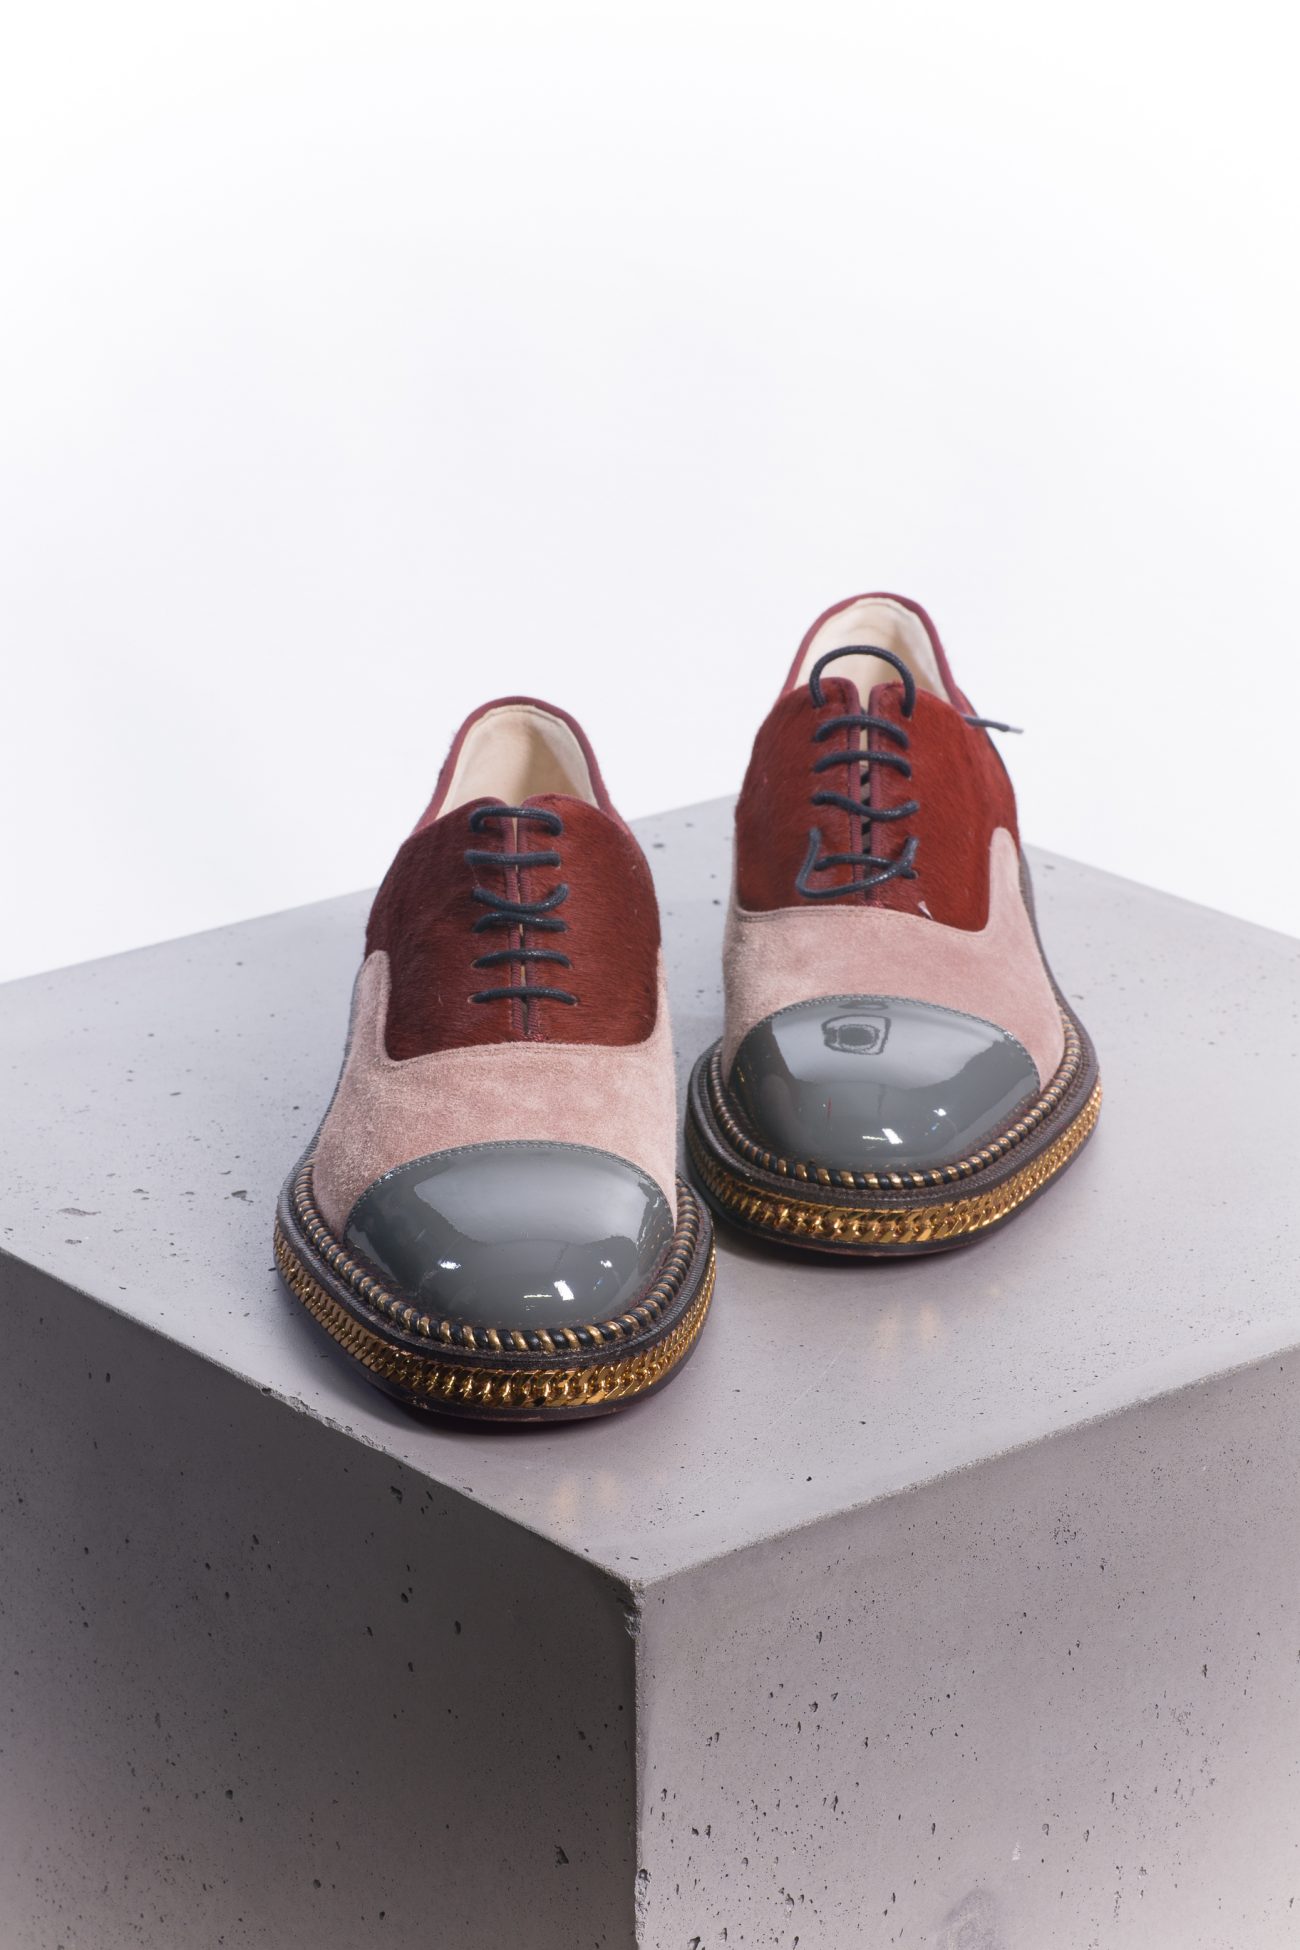 Christian Louboutin Latcho Mixed-Media Oxfords Loafers